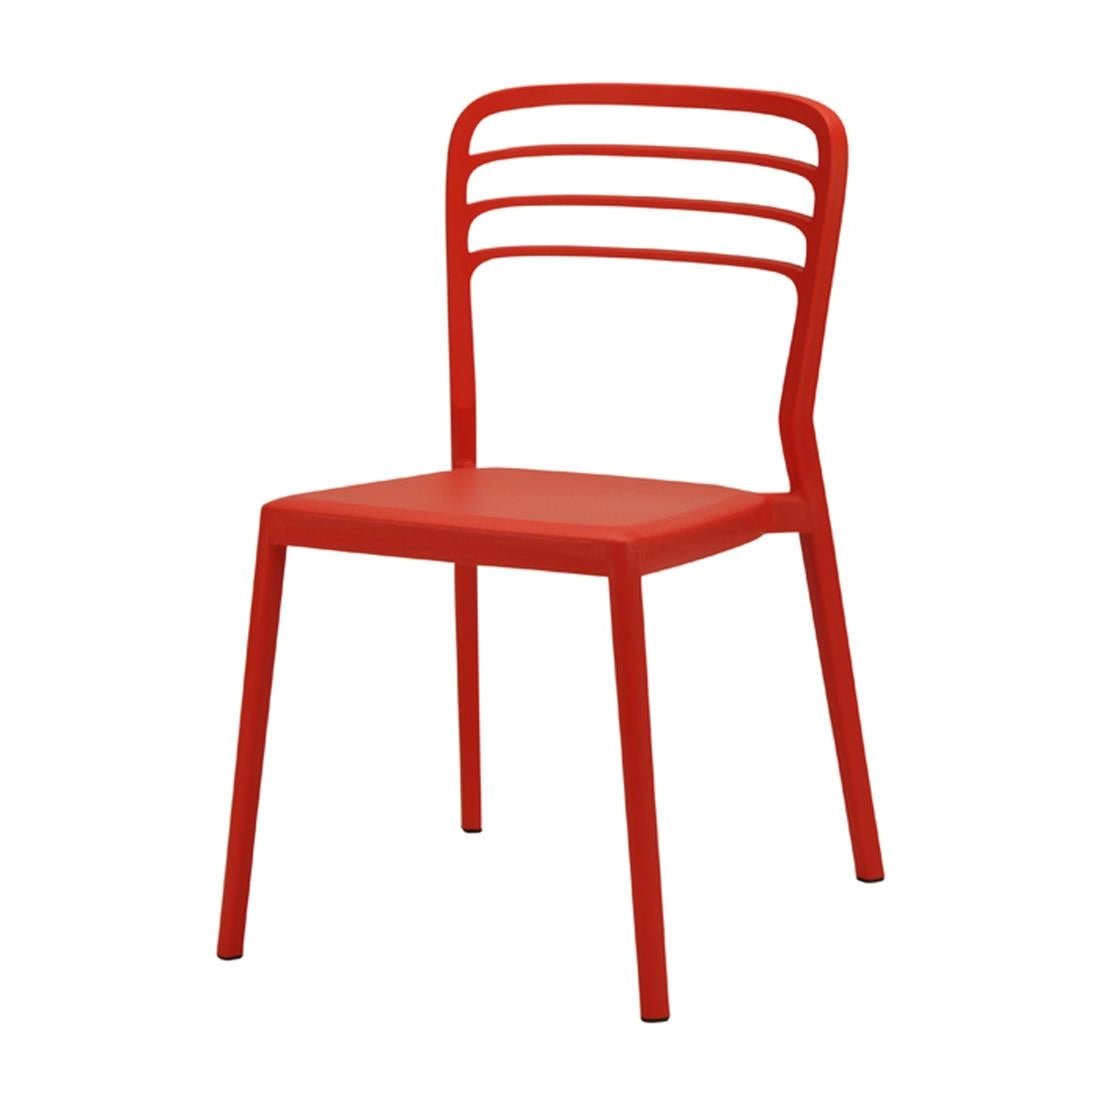 DM087 Newquay Ocean Plastic Outdoor Chair in Red (Pack of 4)